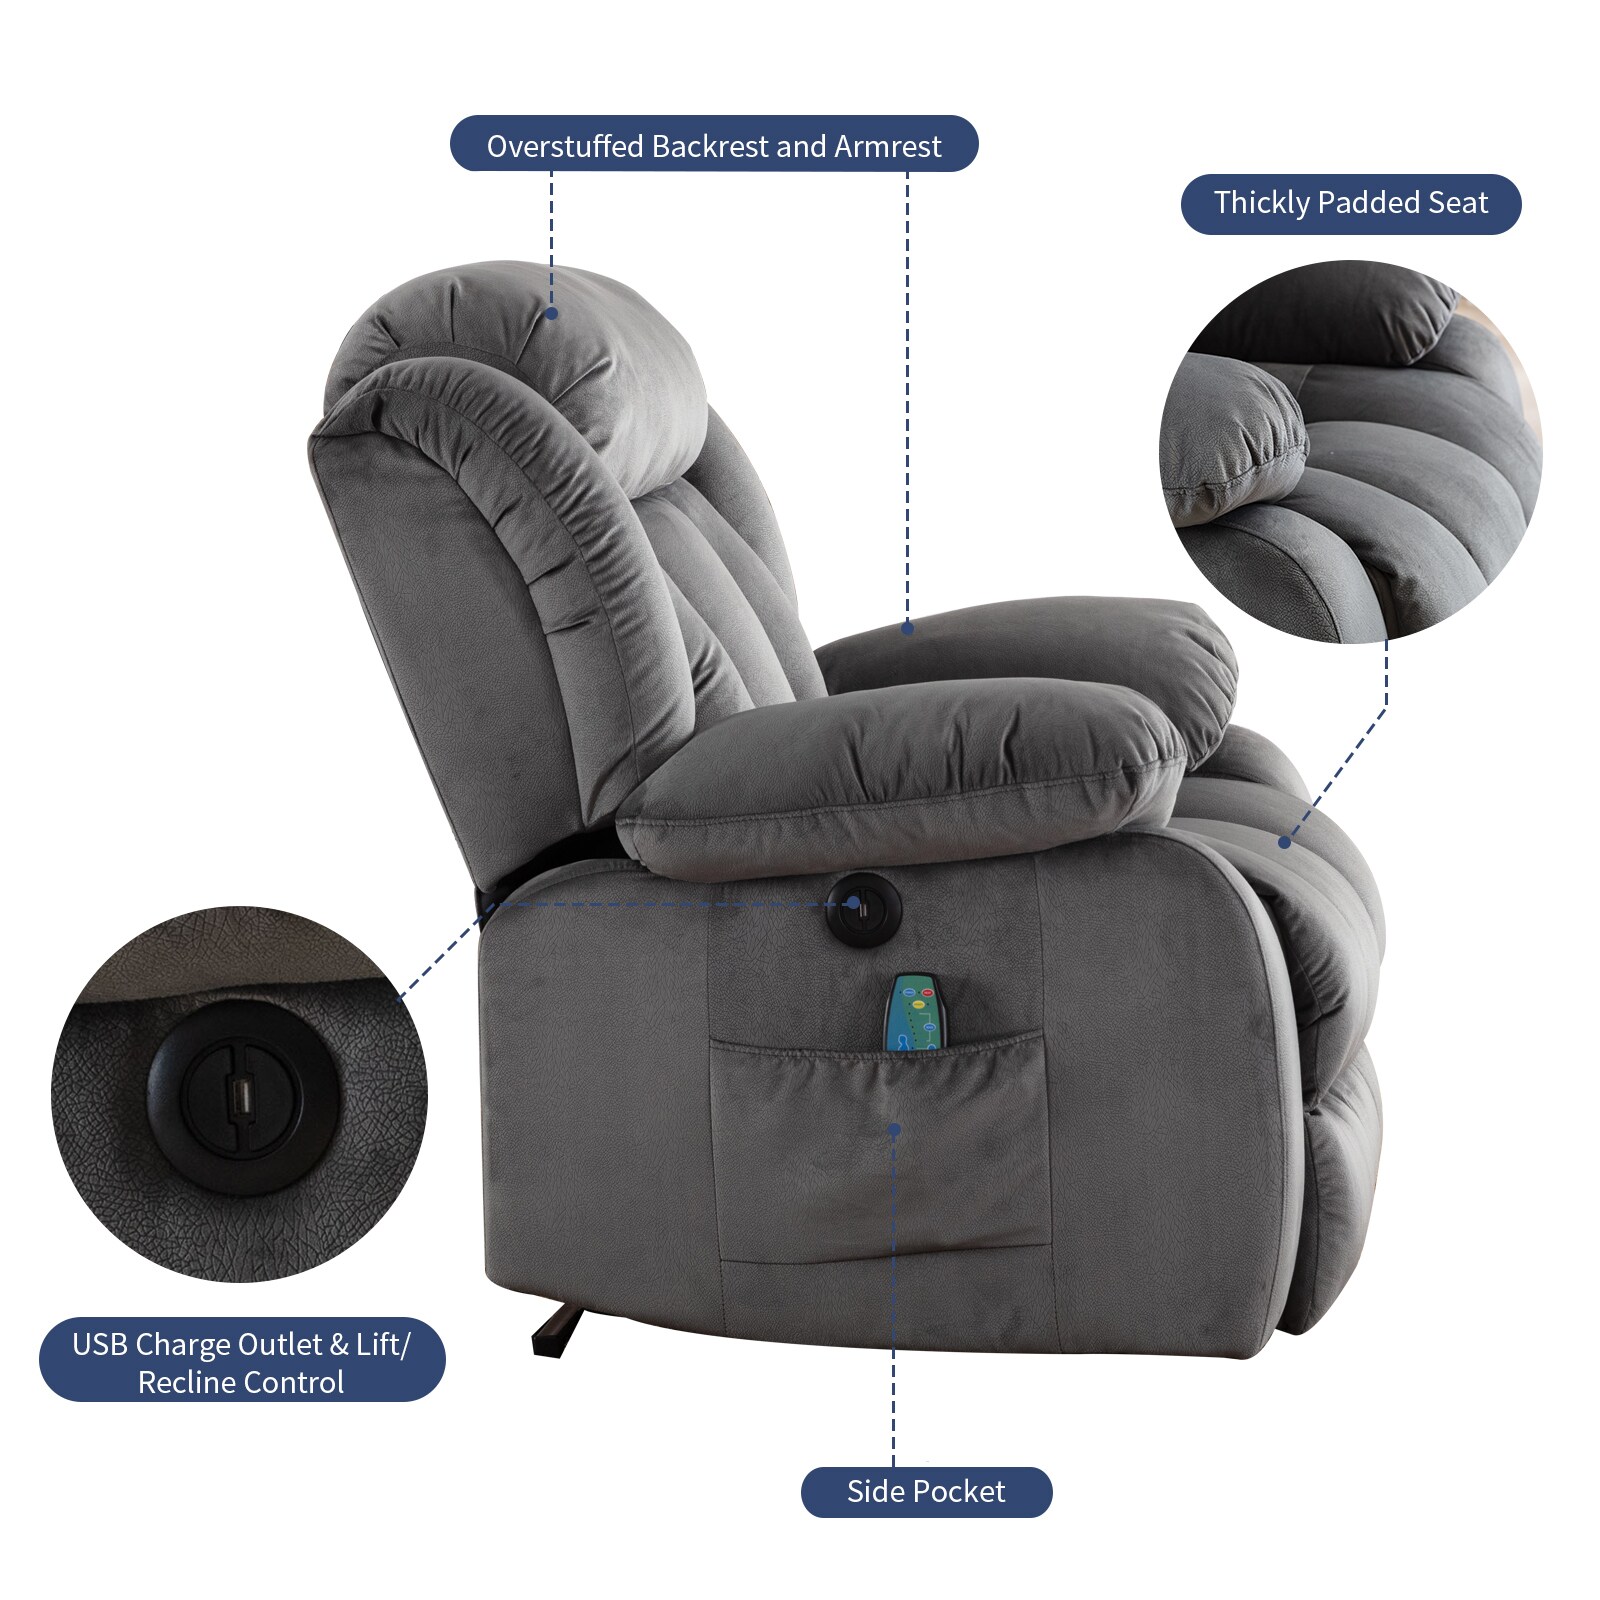 Memory Foam Recliner Overlay for Home Recliners and lift chairs